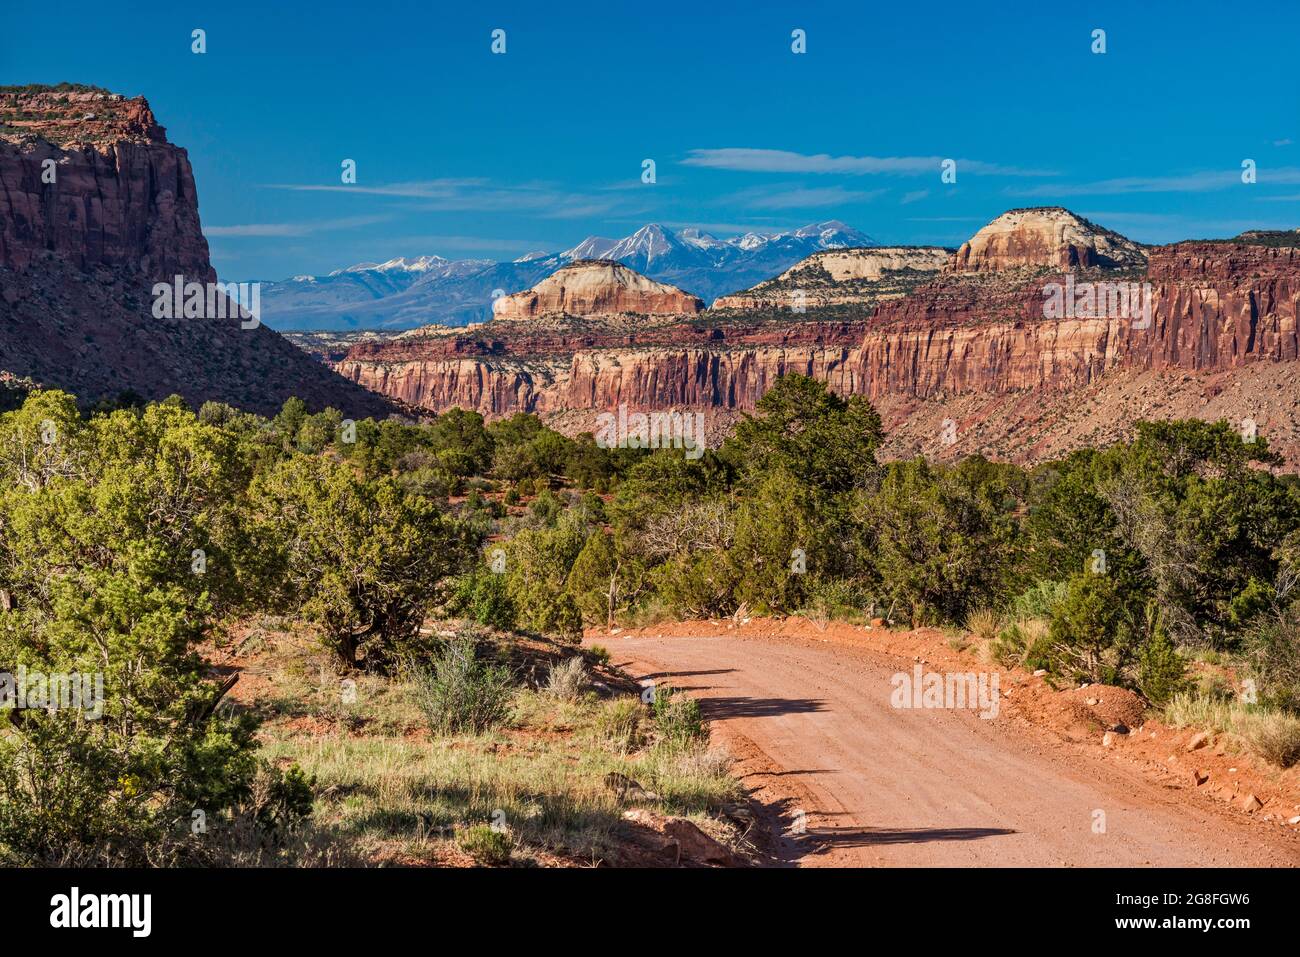 Beef Basin Road, Shay Mesa, Cottonwood Creek Canyon, la SAL Mtns in dist, 40 miglia a nord-est, Bears Ears National Monument, Canyonlands area, Utah, USA Foto Stock